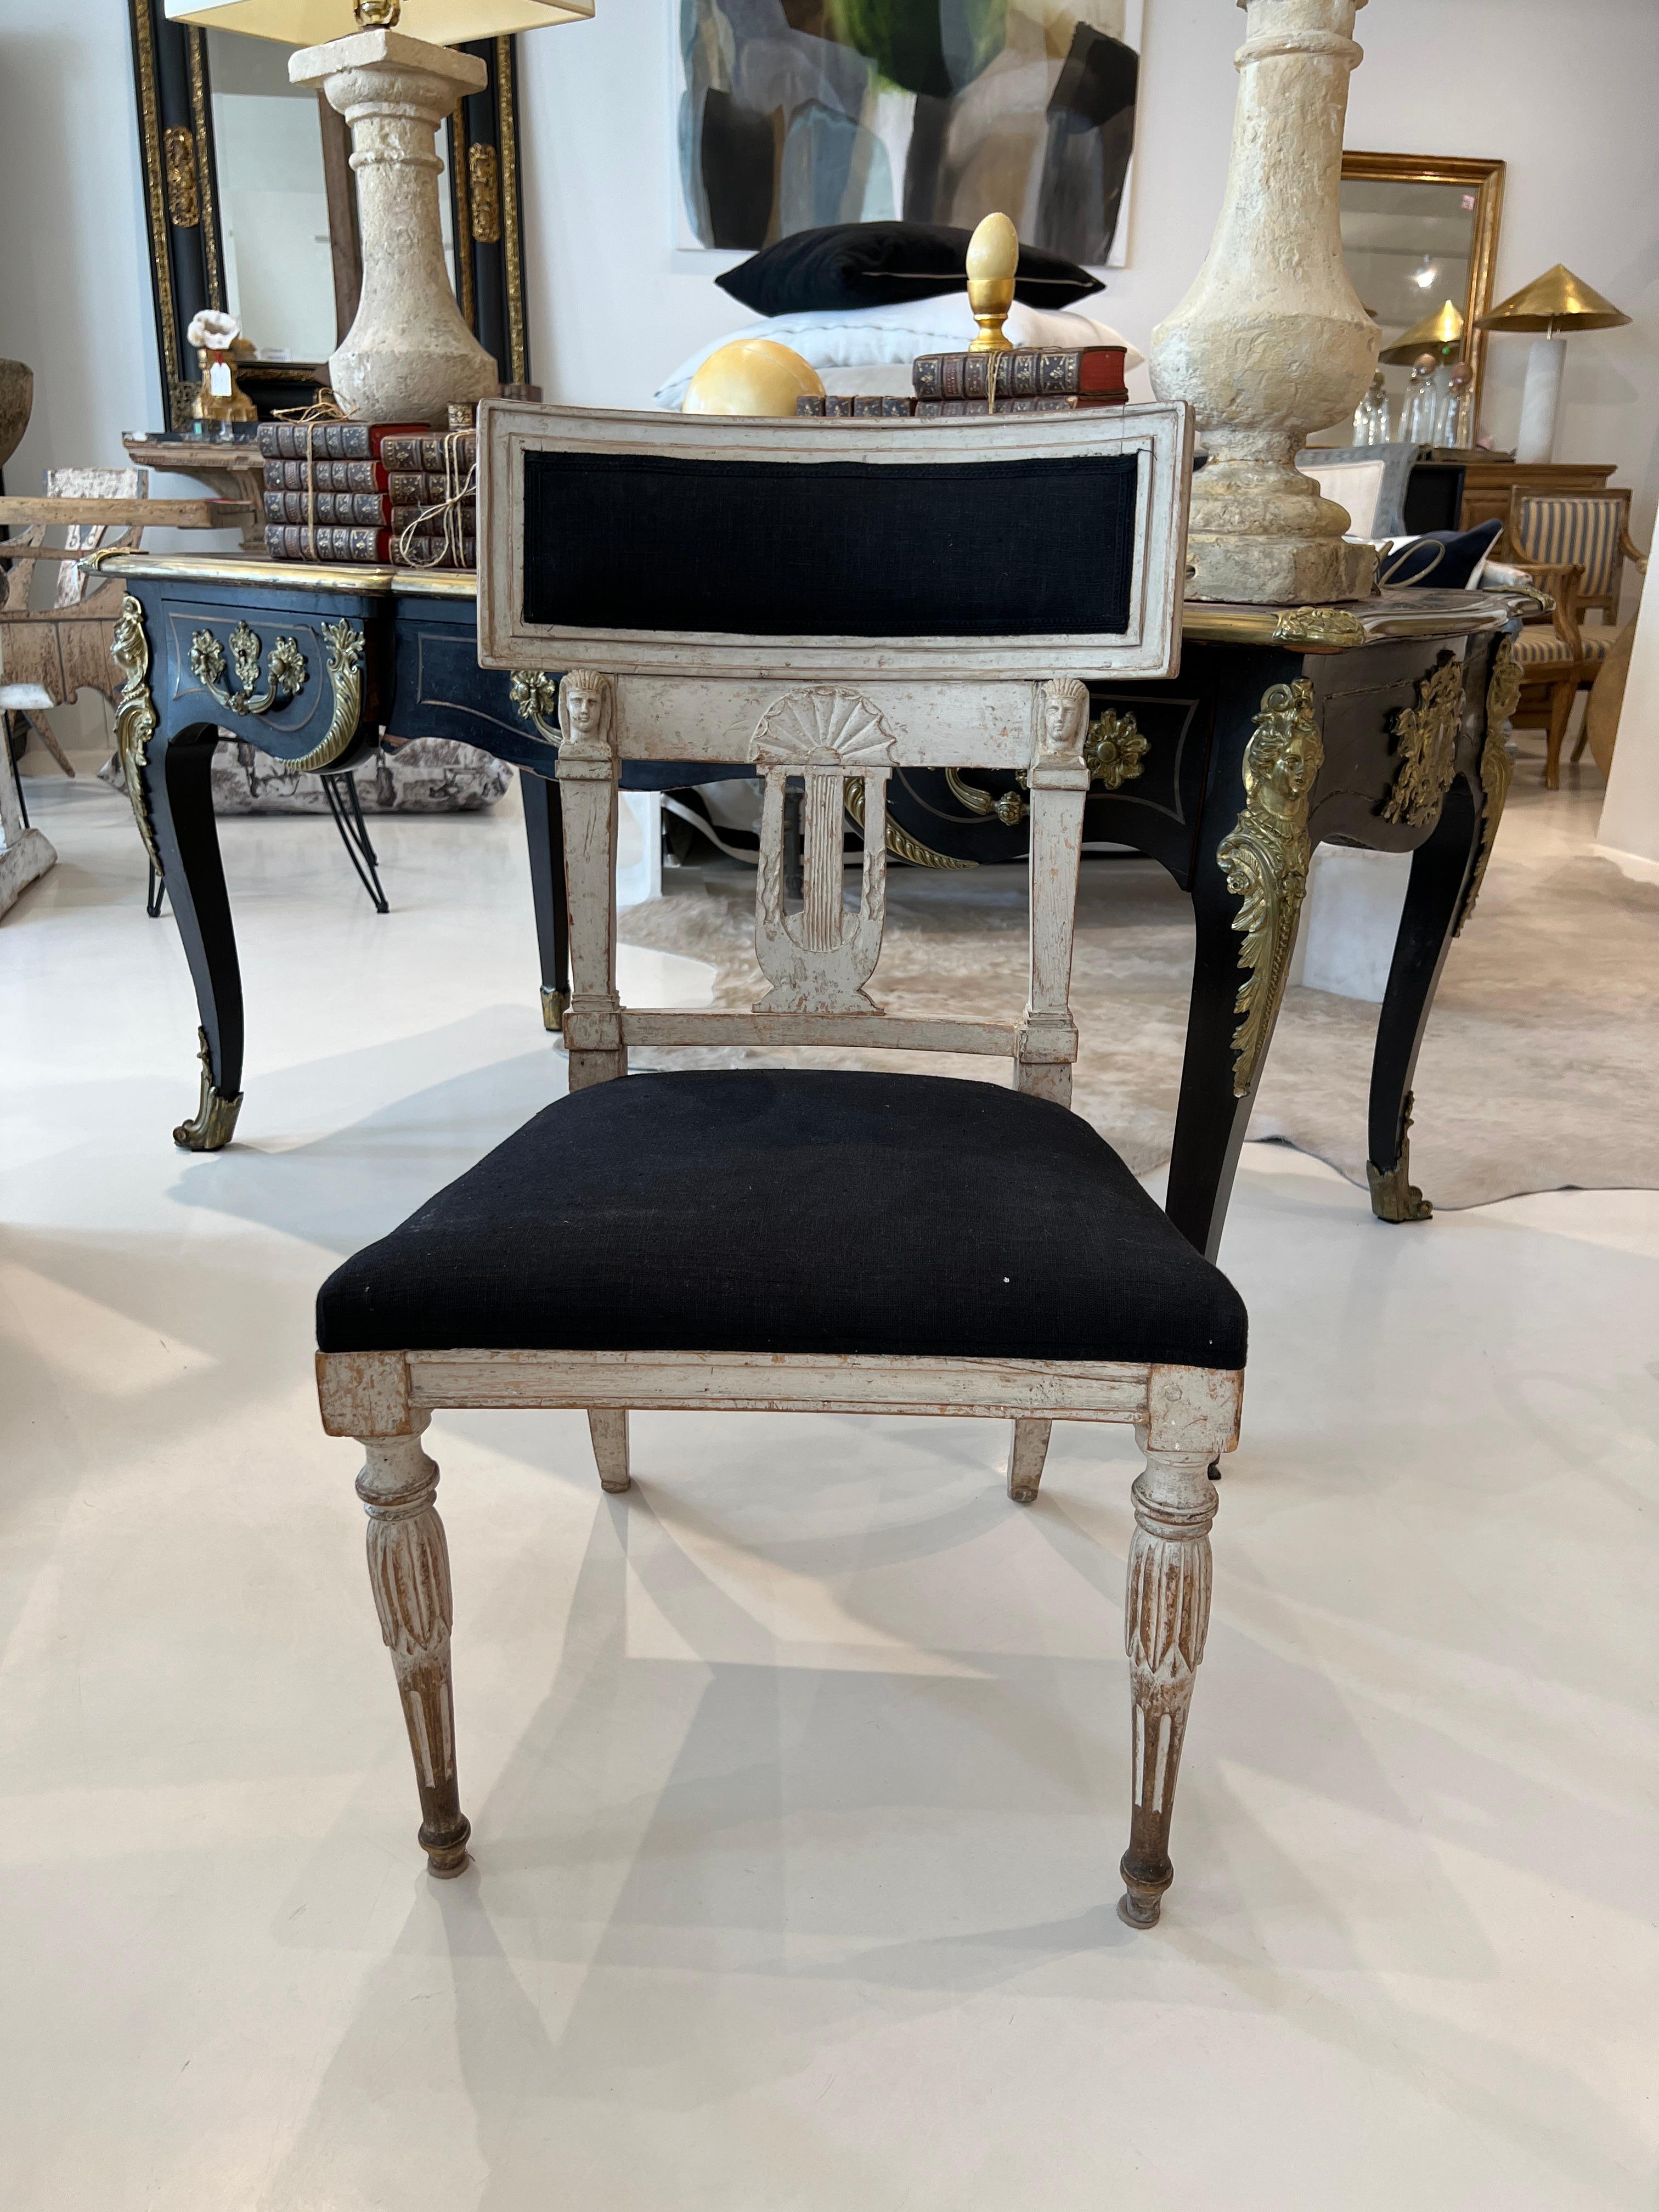 Beautiful Gustavian chair with a surprise.  Two Egyptian faces carved into the back rest.  Soft grey painted wood is set off by black upholstery.